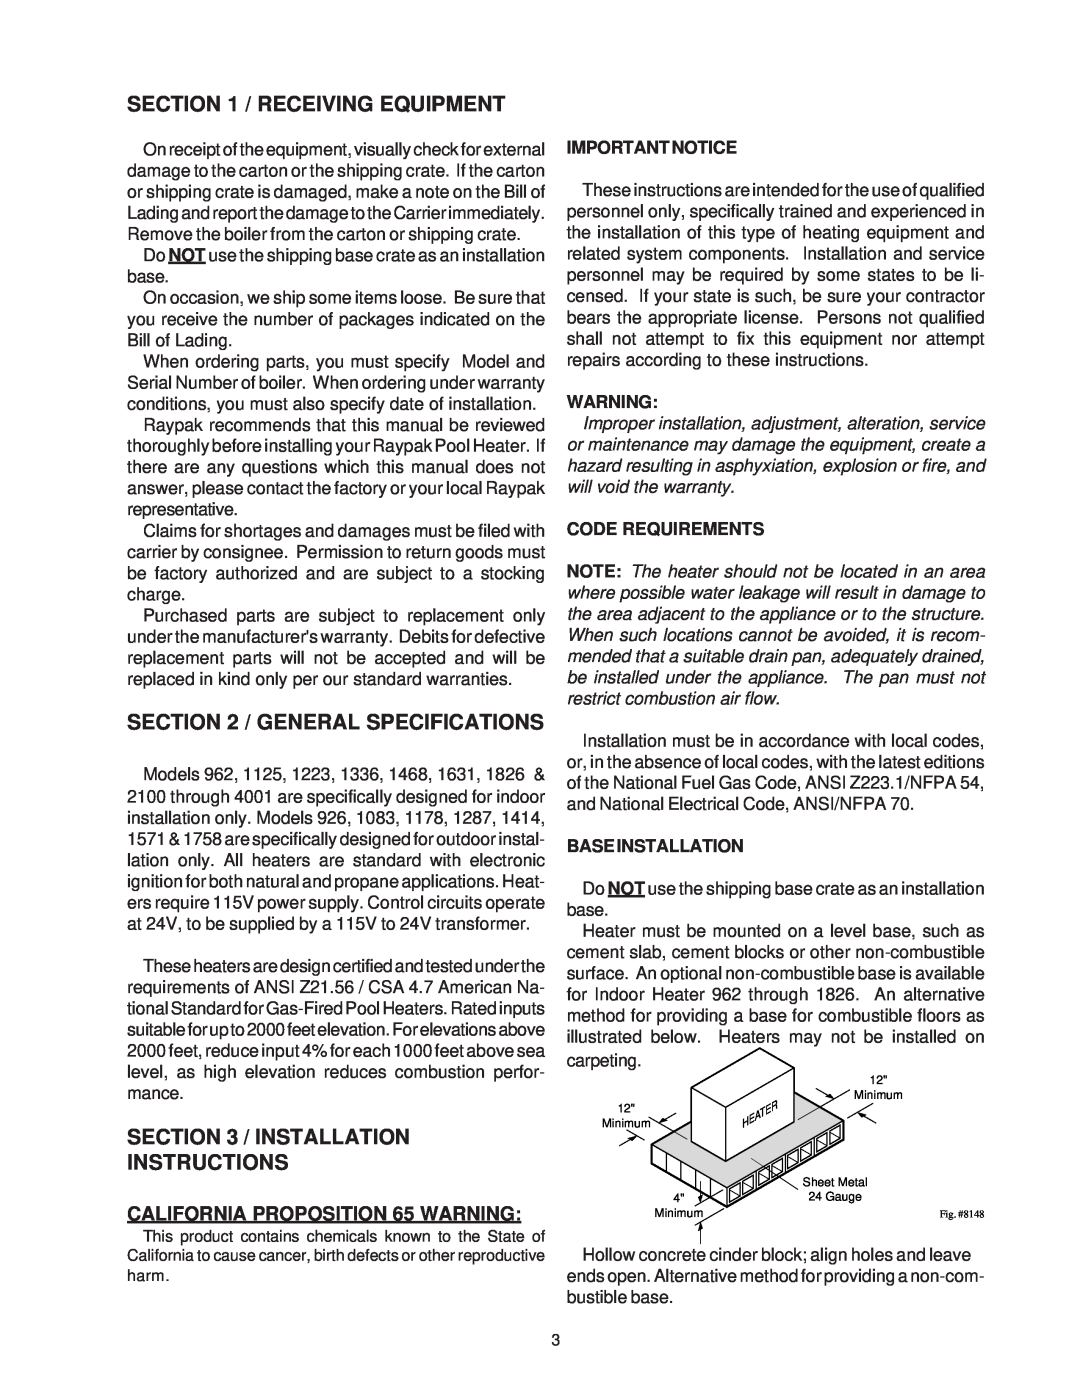 Raypak 1287-1758, 2100-4001 manual Receiving Equipment, General Specifications, Installation Instructions, Important Notice 